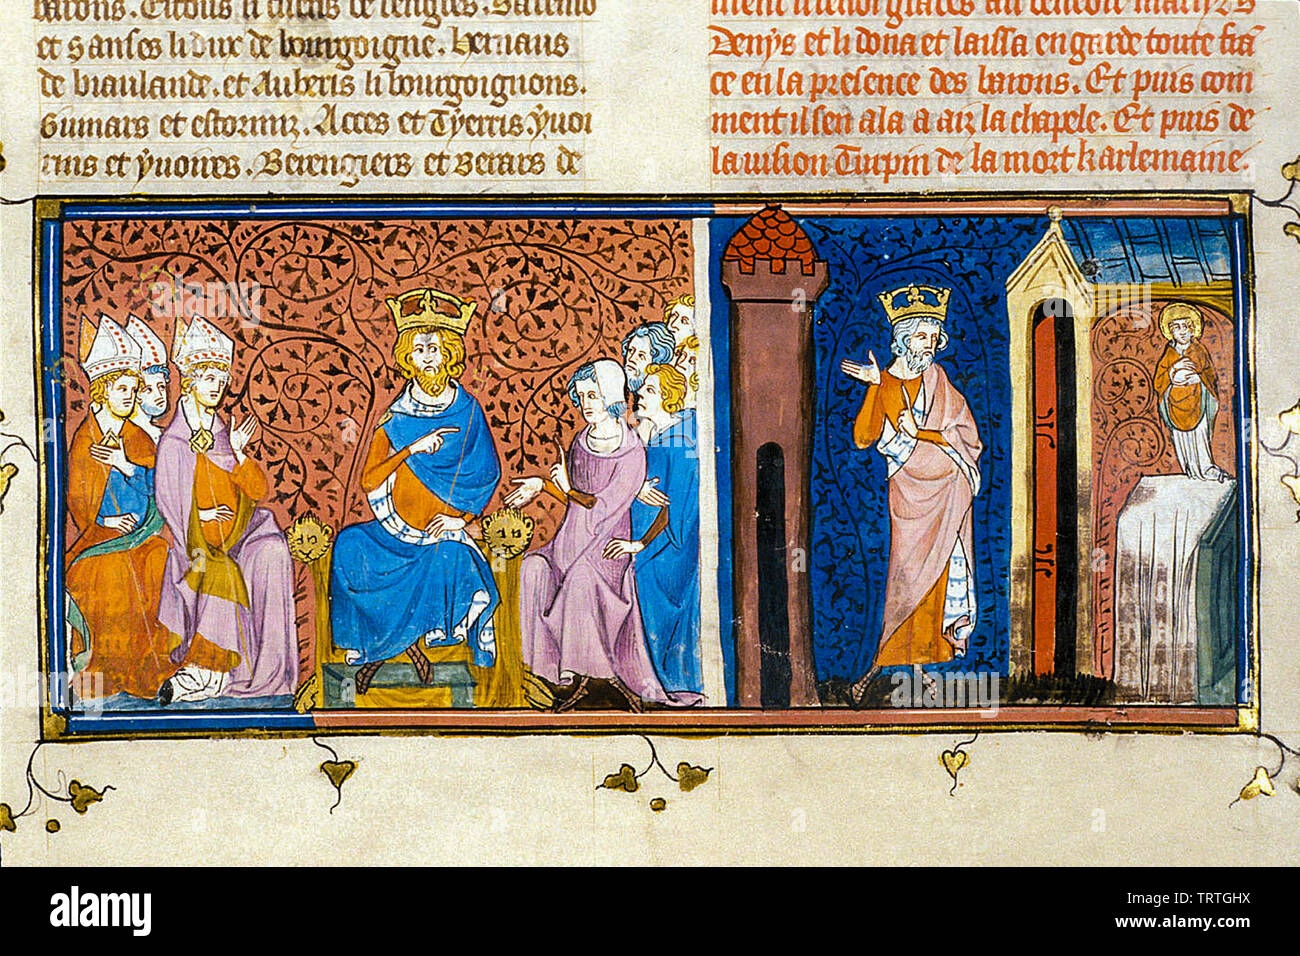 Charlemagne in council, and Charlemagne honouring St Denis, illustration, 1332-1350 Stock Photo